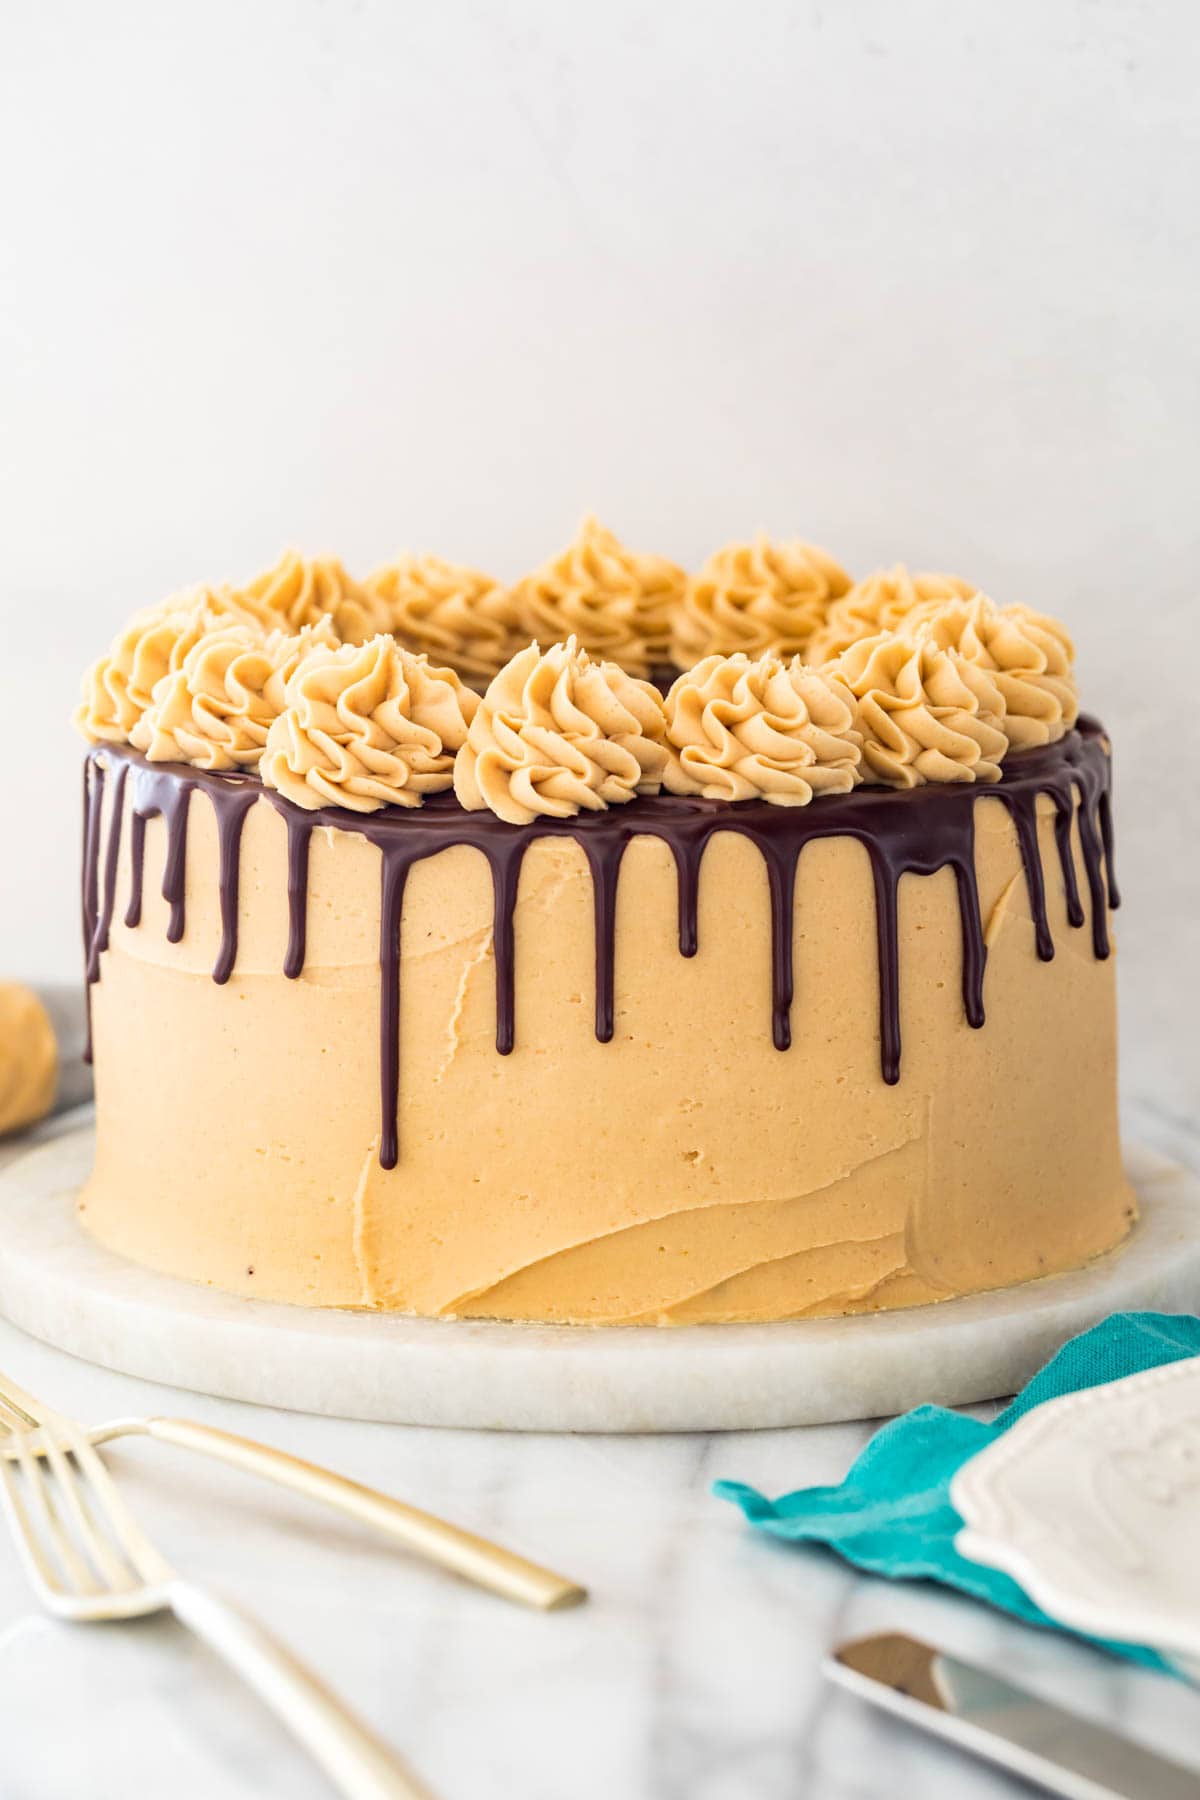 cake frosted with peanut butter icing and decorated with a chocolate drip